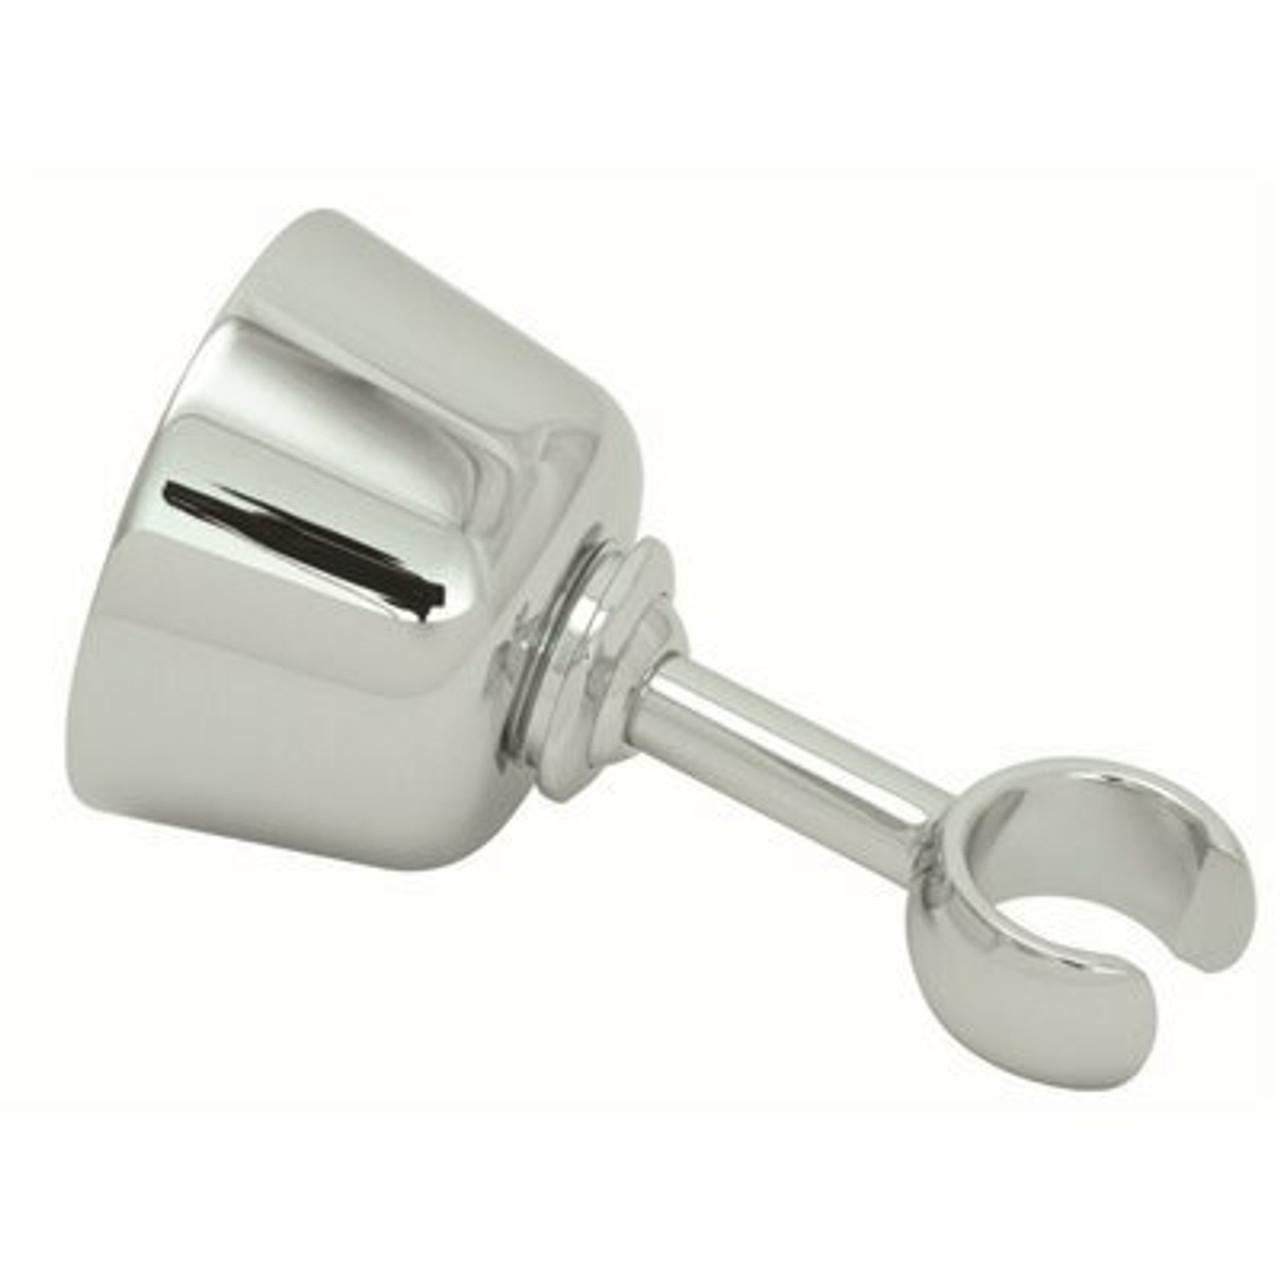 Moen Commercial Handheld Shower Wall Brackets With Hardware In Chrome